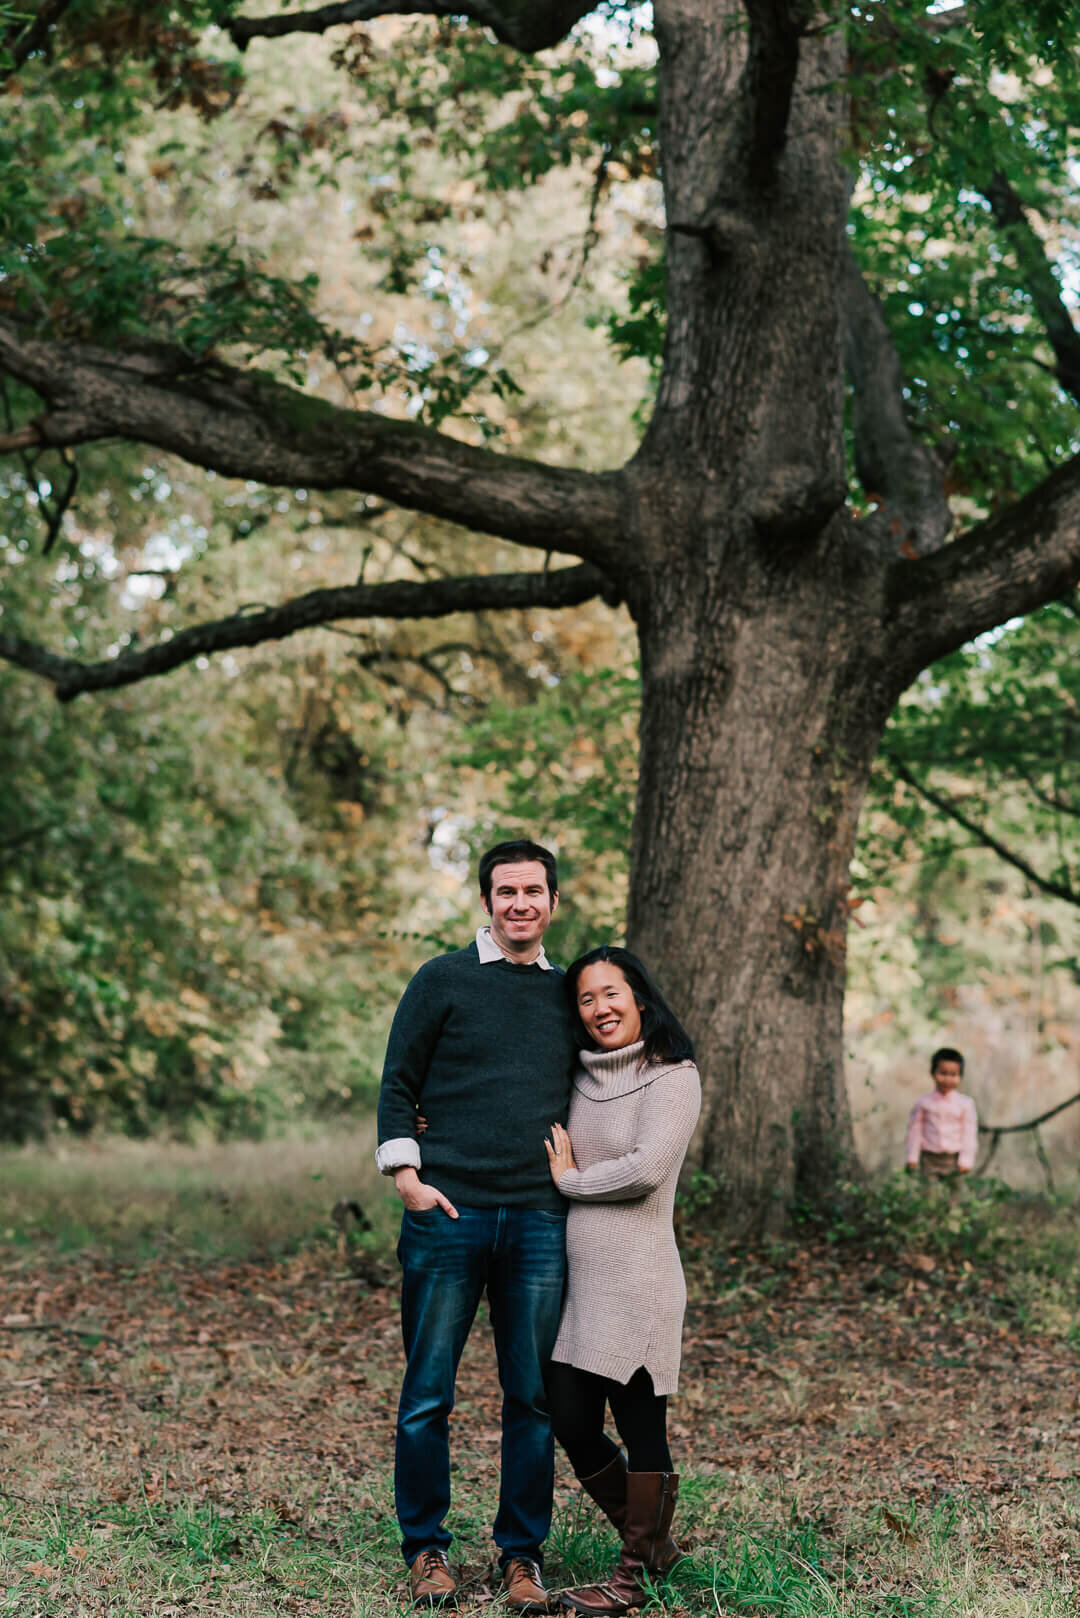 A couple standing together in front of a tree while their son stands in the distance